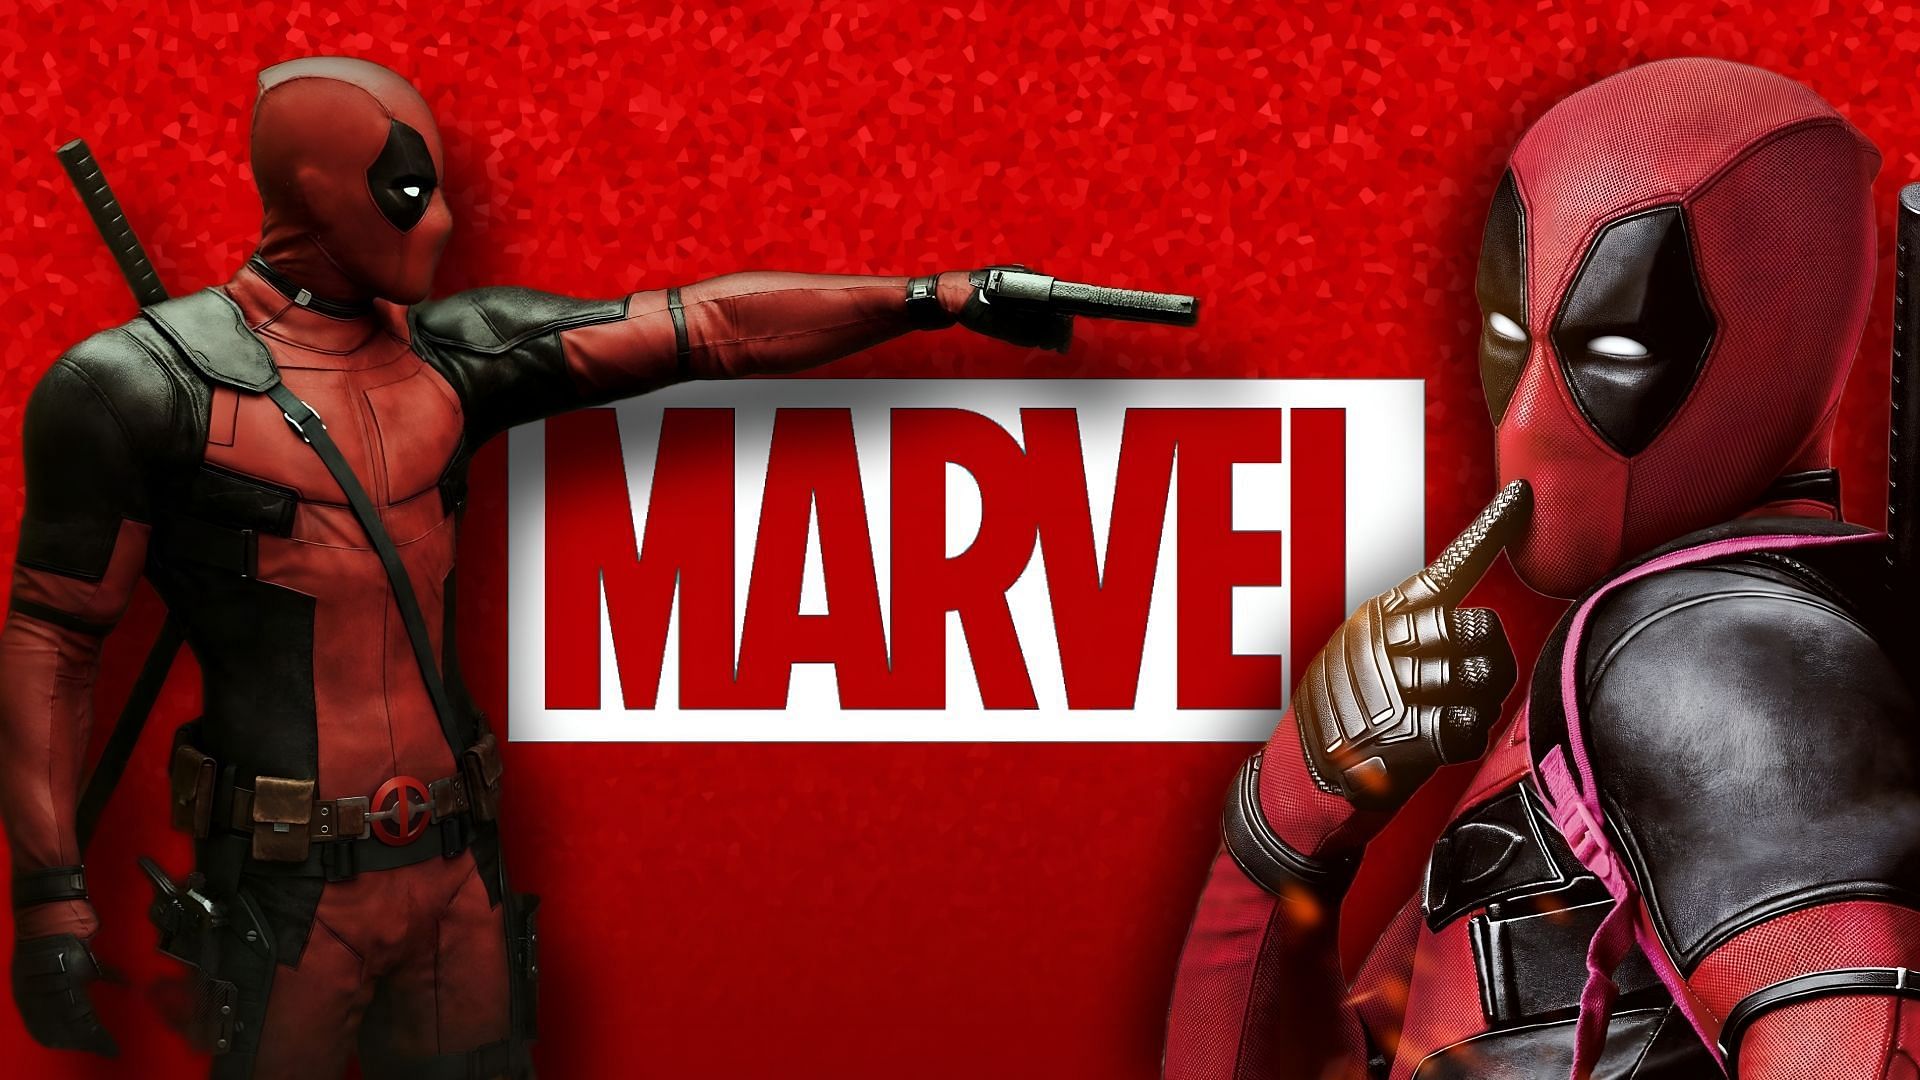 Deadpool 3 Confirmed to Be Very Much a Part of the MCU